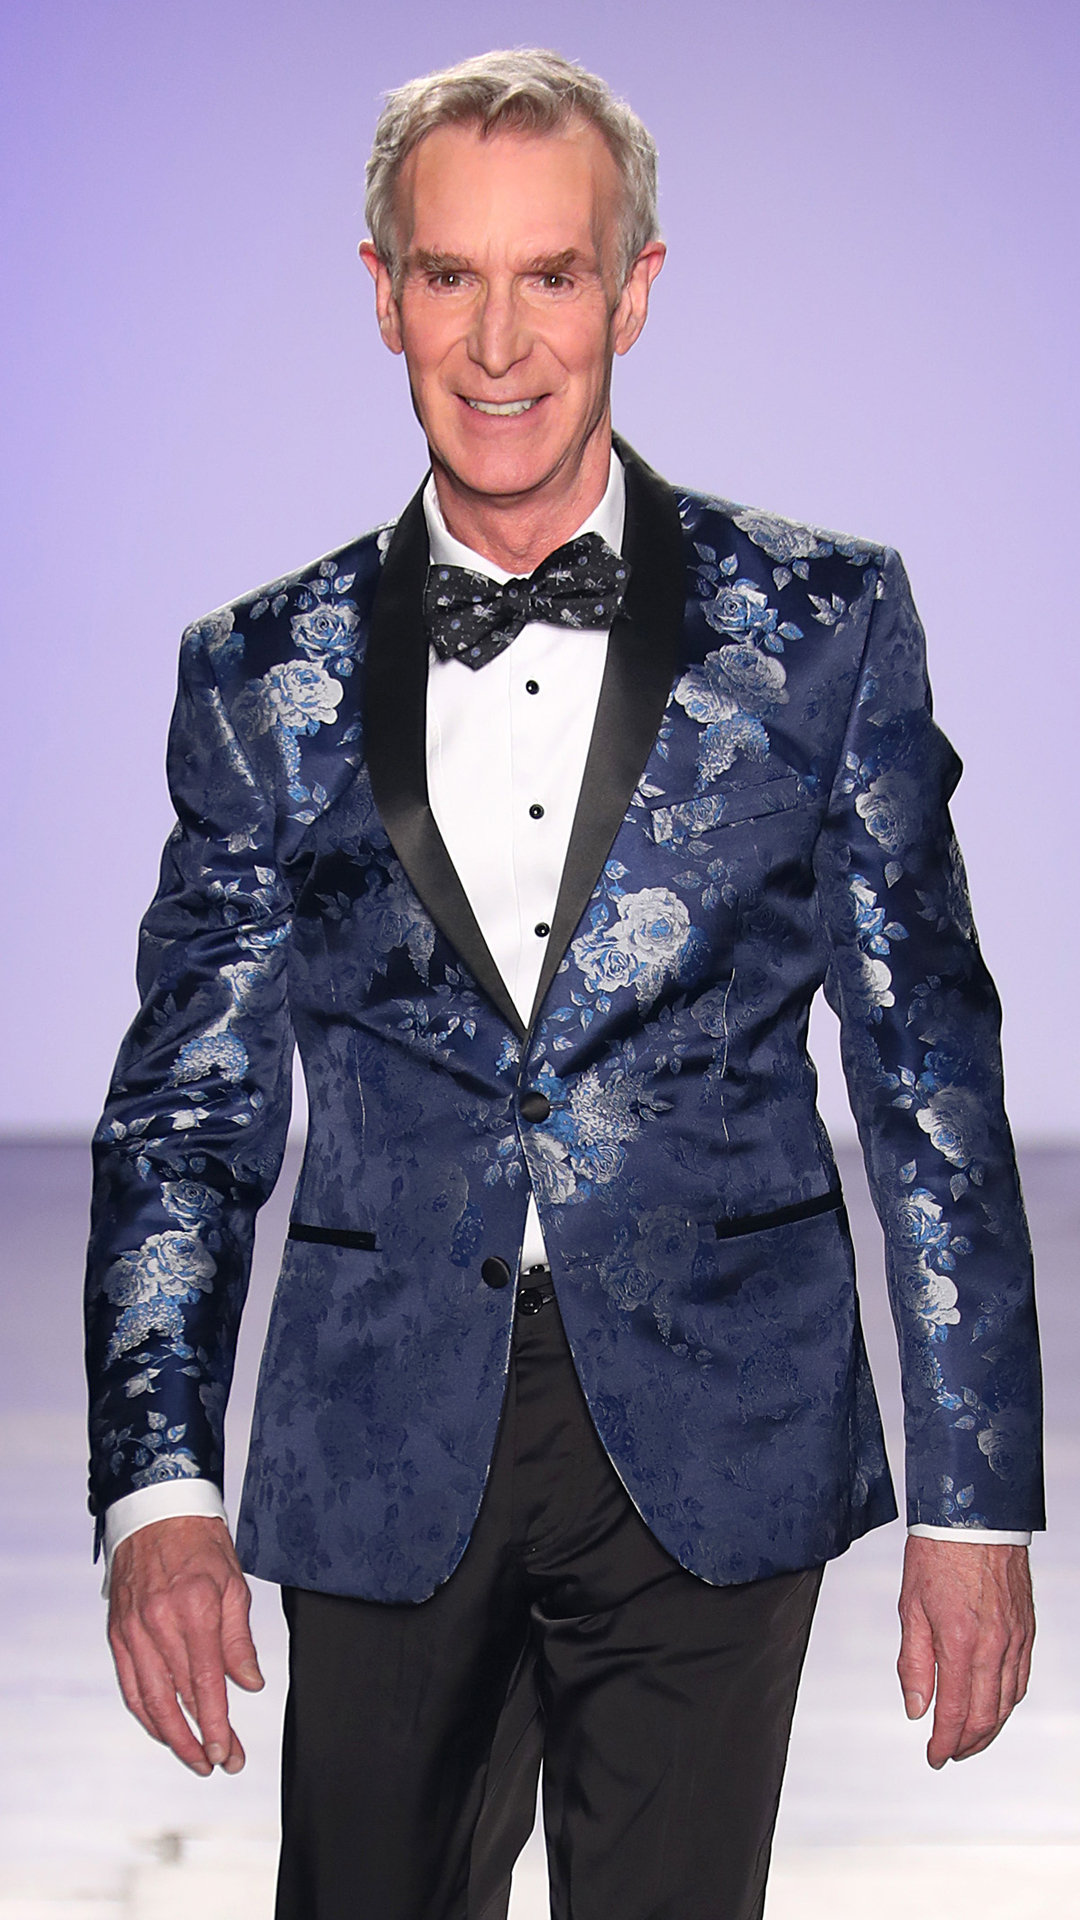 Bill Nye Is the Real Star at New York Fashion Week